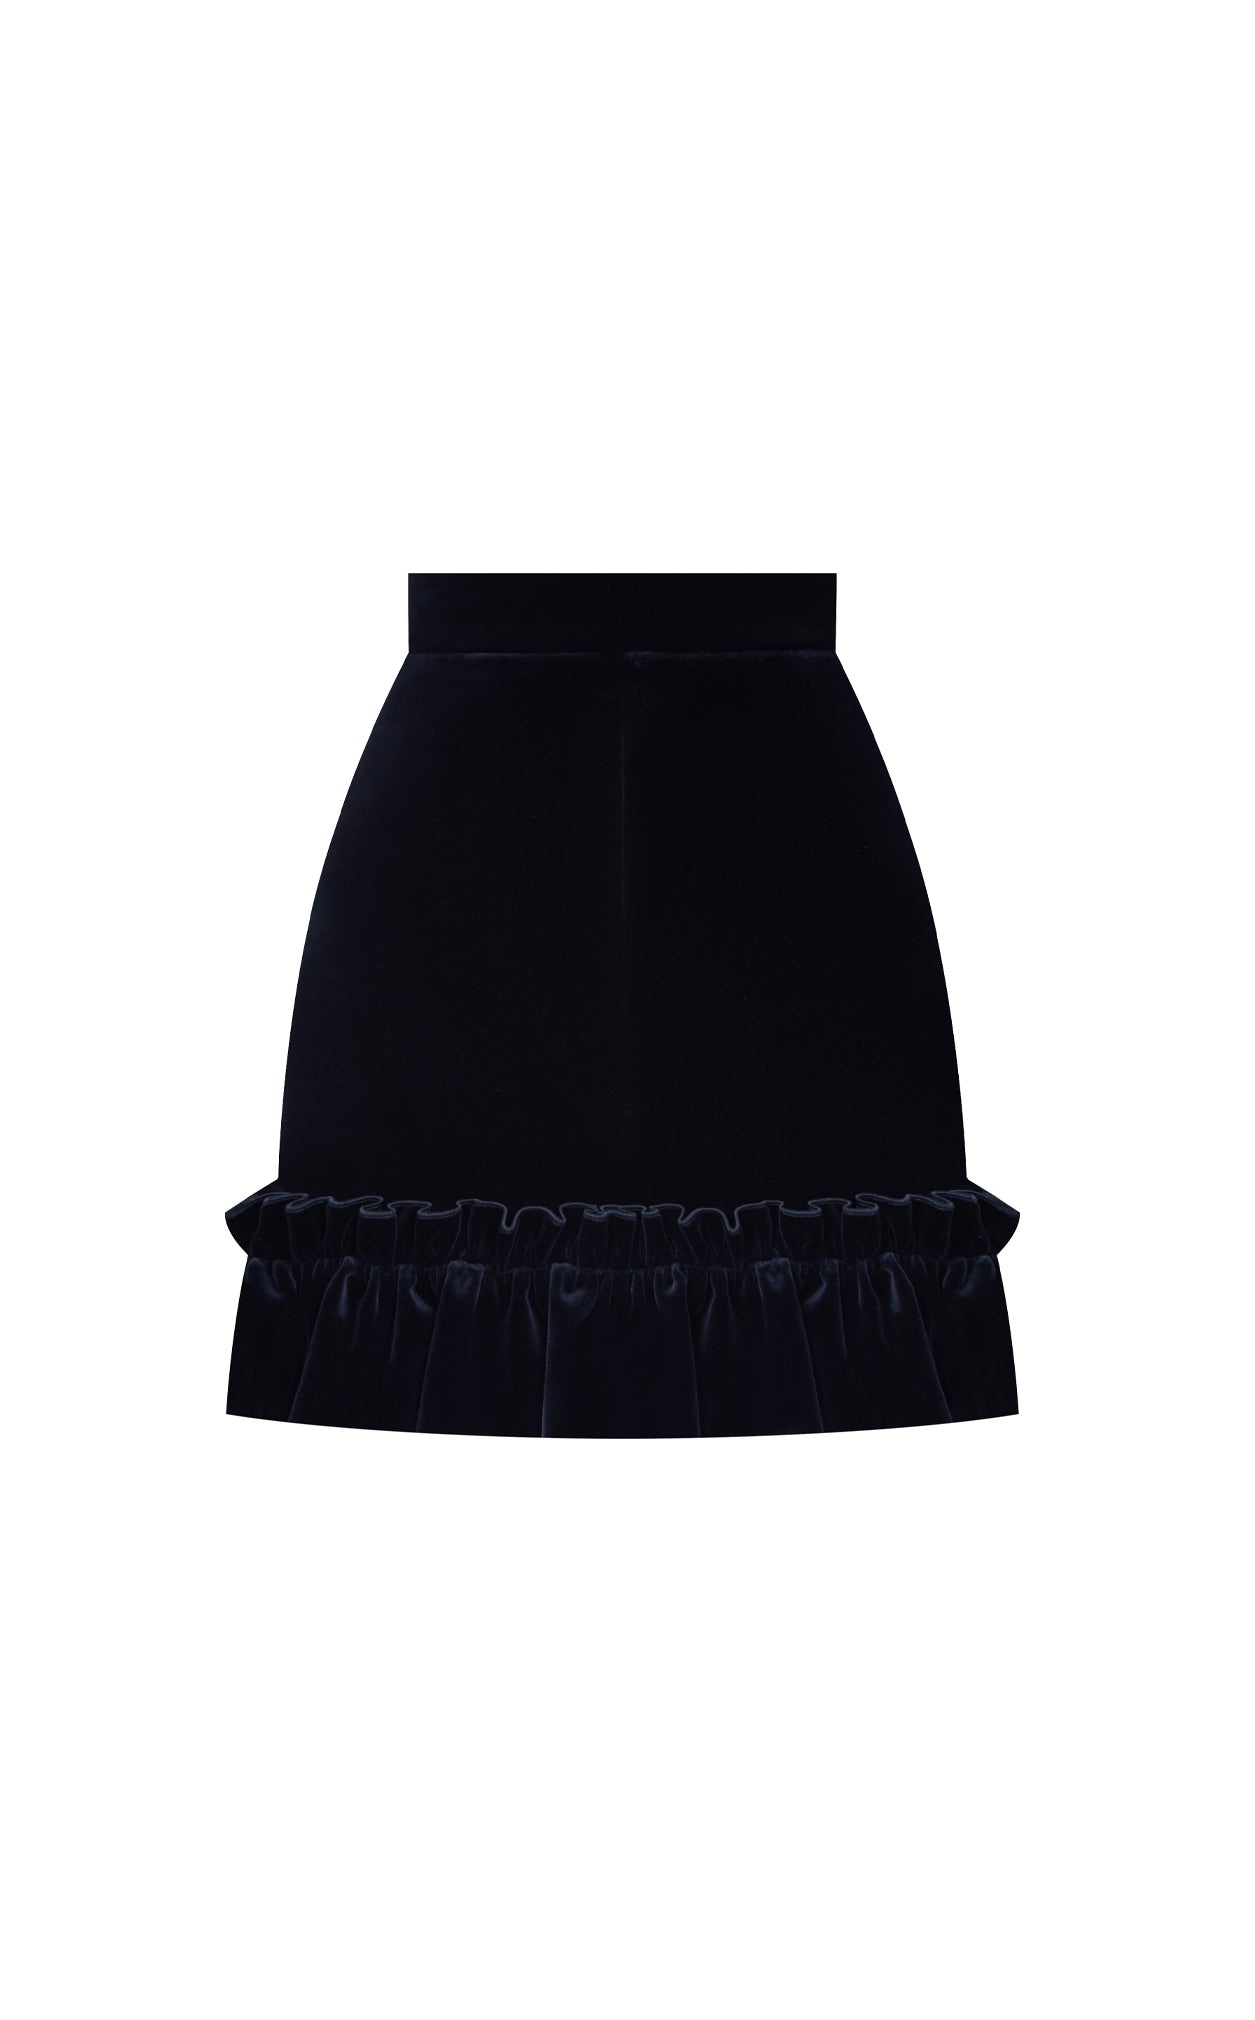 THE NEARLY NUTHIN' SKIRT WITH FRILL - 4